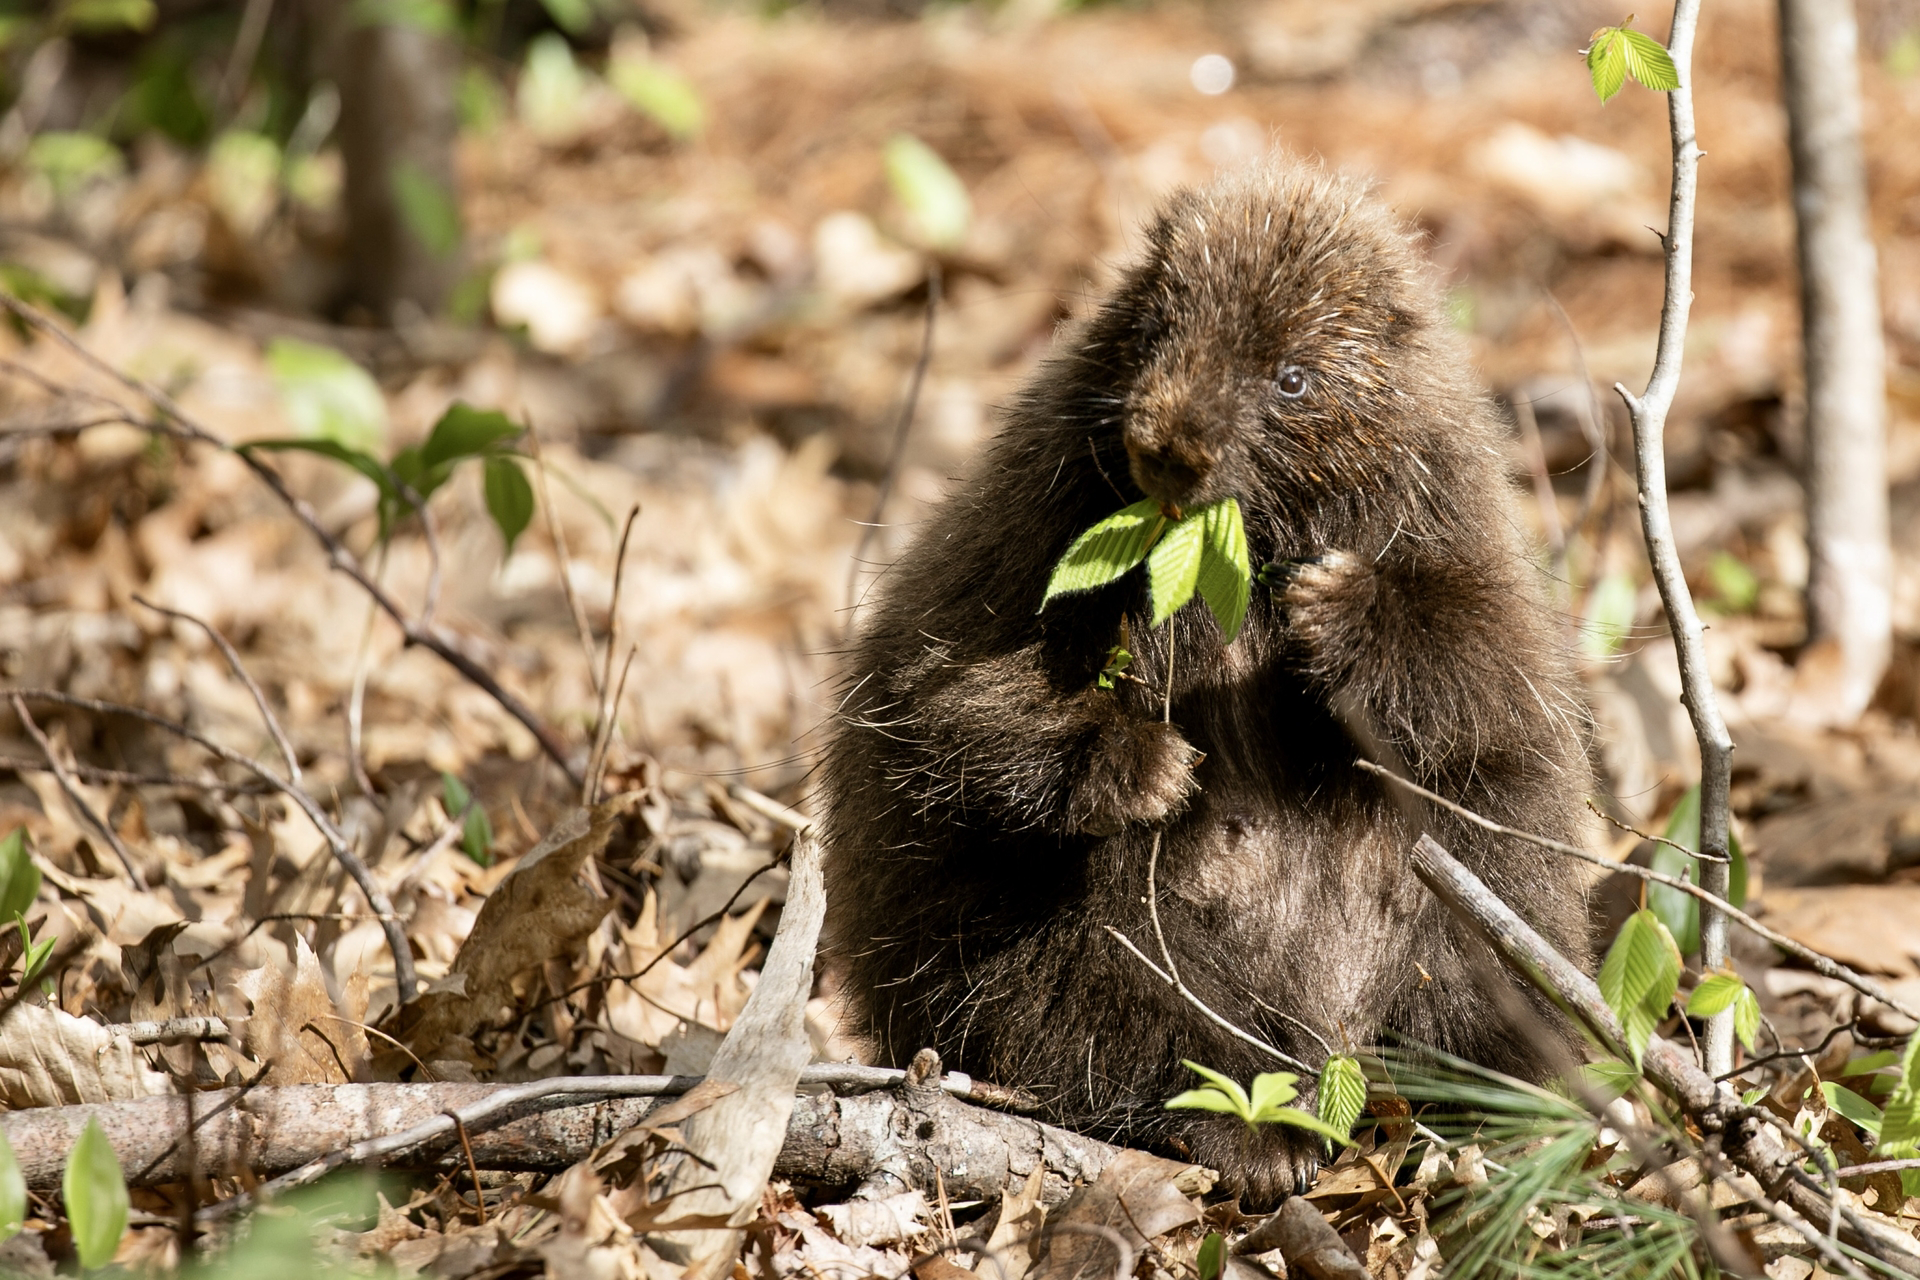 A porcupine sitting on its hind legs eating leaves off a twig.